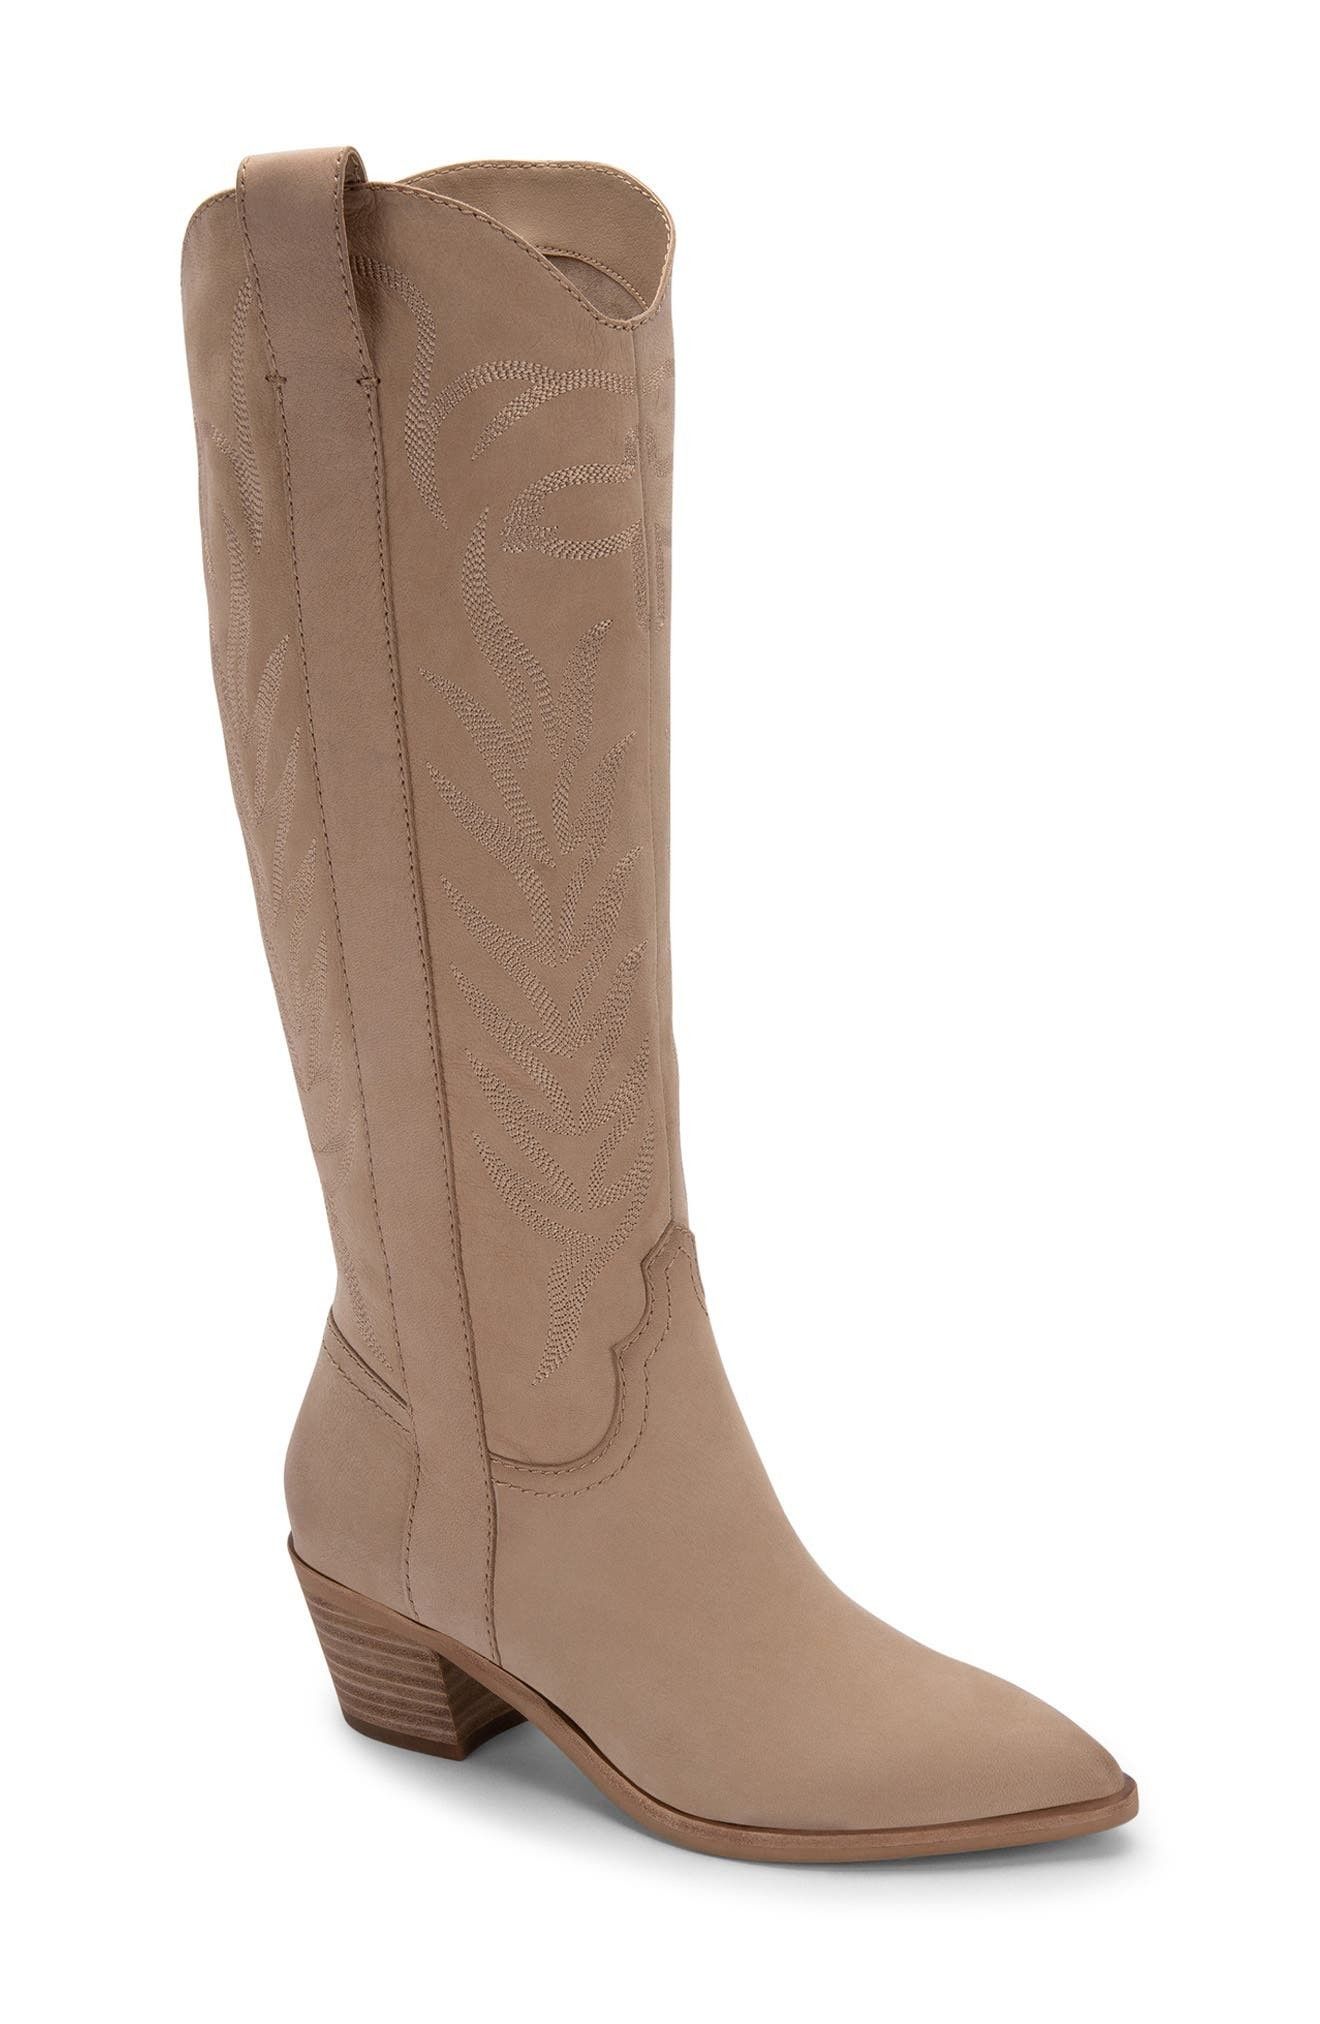 Dolce Vita Solei Western Boot in Dune Nubuck at Nordstrom, Size 5.5 | Nordstrom